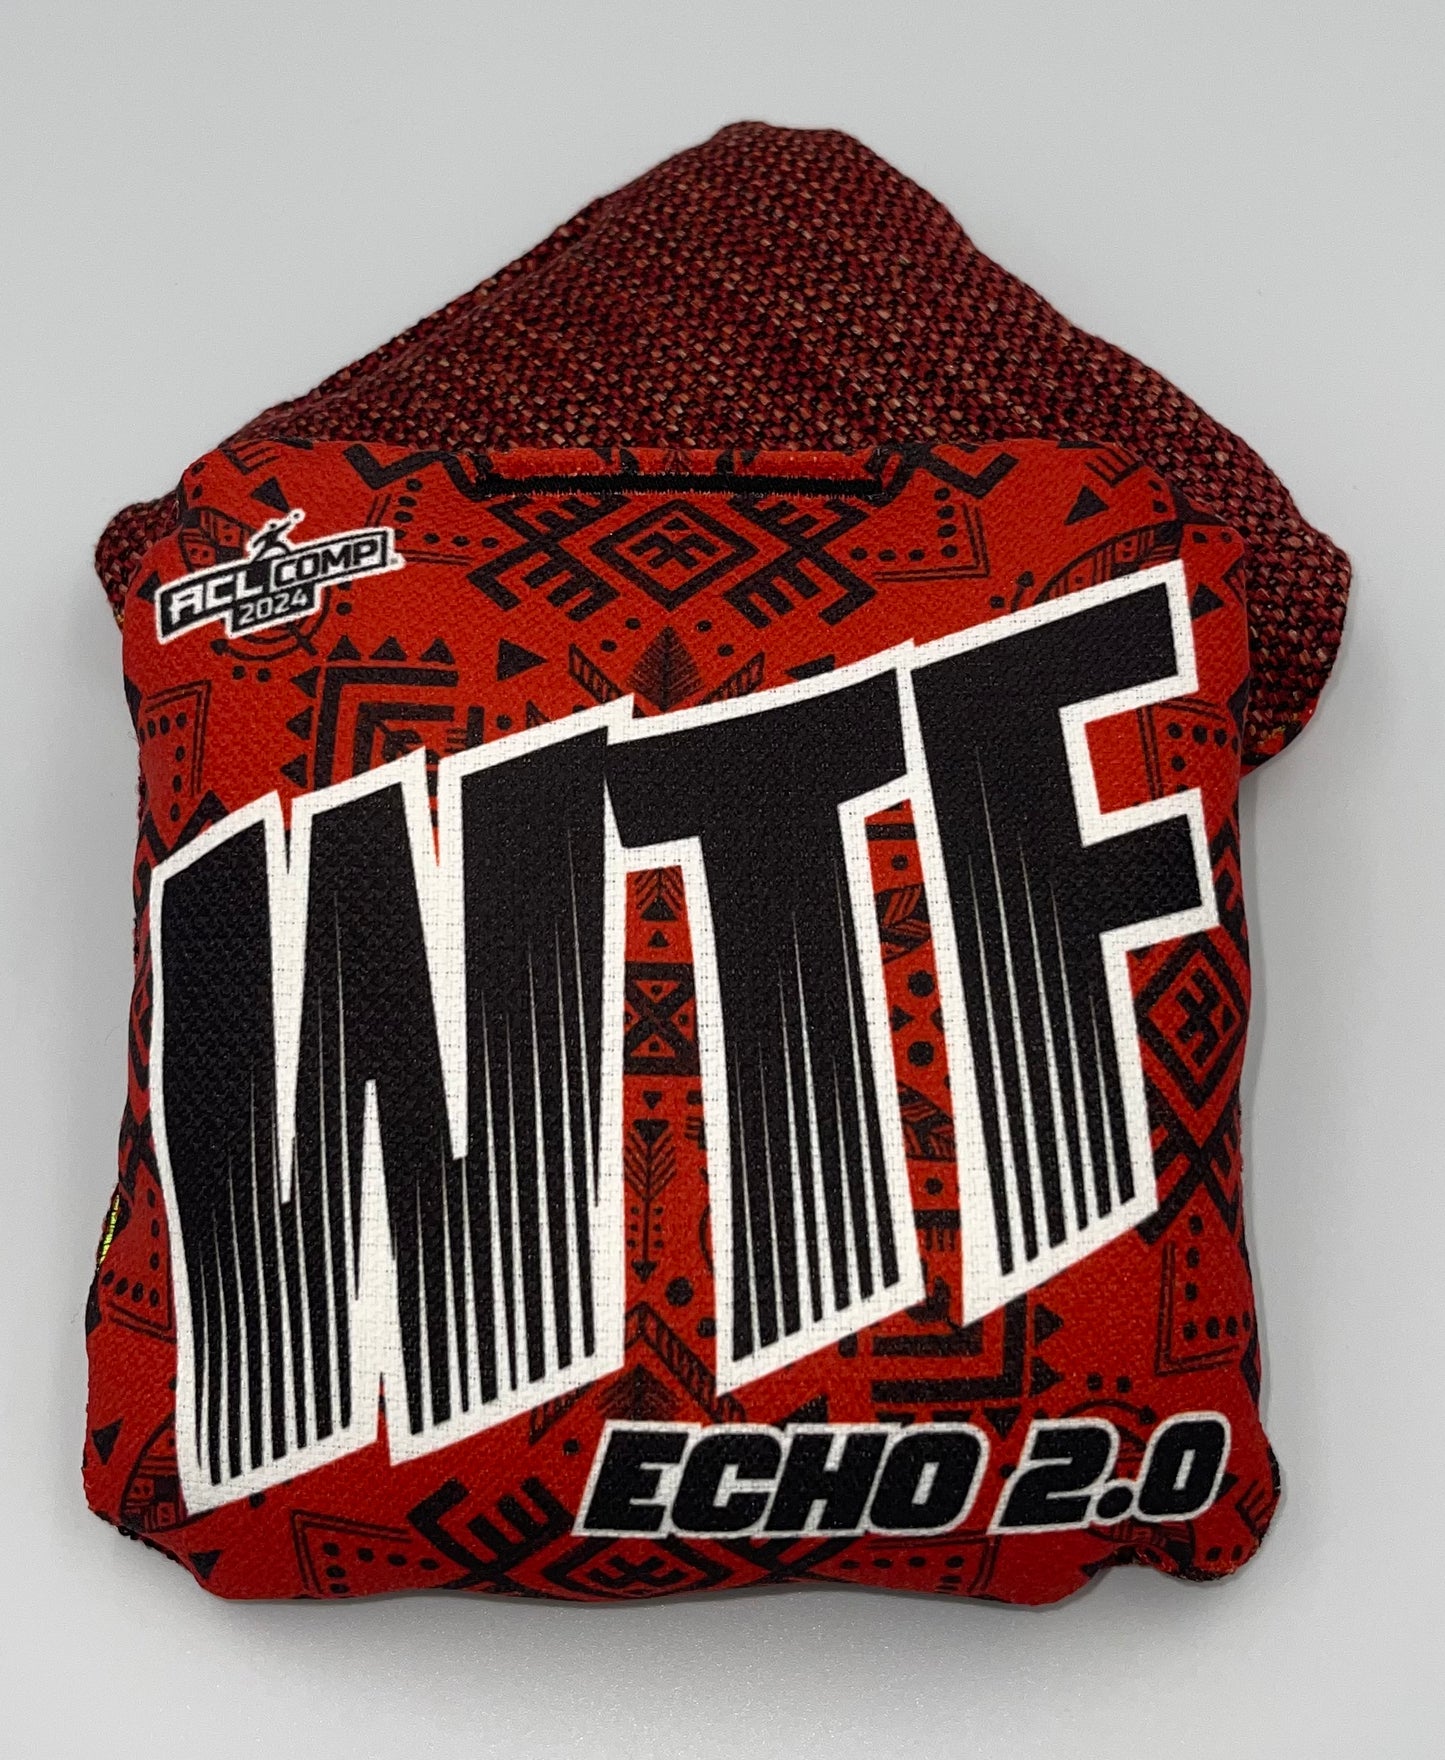 Echo 2.0 - ACL Comp Stamped Cornhole Bags - Set of 4 bags